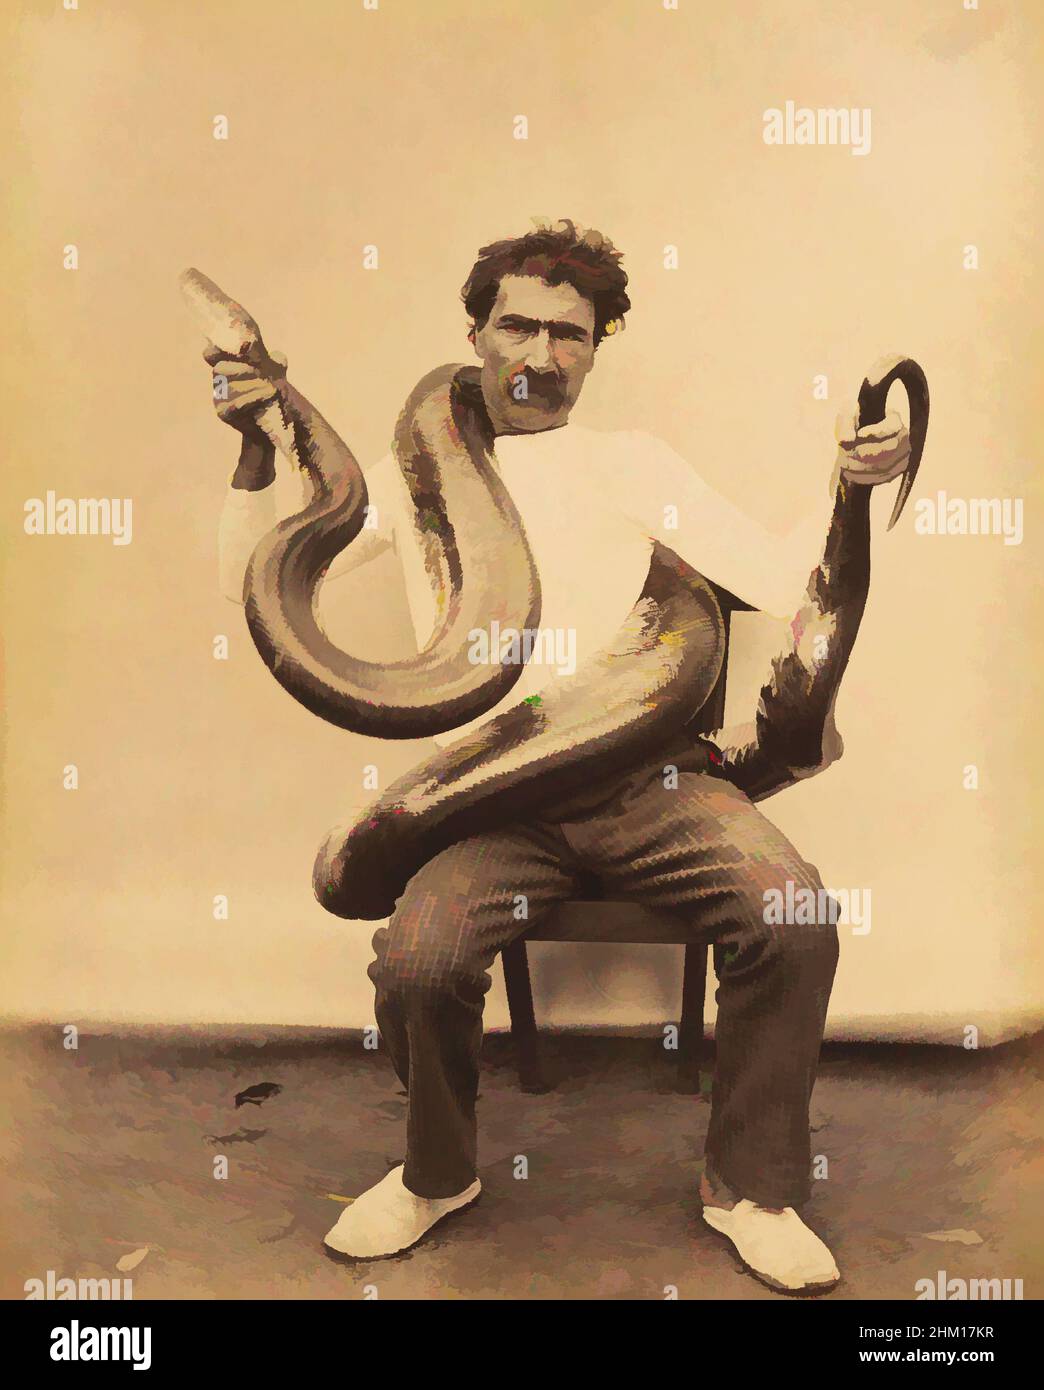 Art inspired by Portrait of an unknown man sitting on a chair with a boa constrictor around his neck, Boa Constrictor No. 236, Zuid-Amerika, 1880 - 1900, paper, cardboard, albumen print, height 275 mm × width 221 mmheight 376 mm × width 296 mm, Classic works modernized by Artotop with a splash of modernity. Shapes, color and value, eye-catching visual impact on art. Emotions through freedom of artworks in a contemporary way. A timeless message pursuing a wildly creative new direction. Artists turning to the digital medium and creating the Artotop NFT Stock Photo